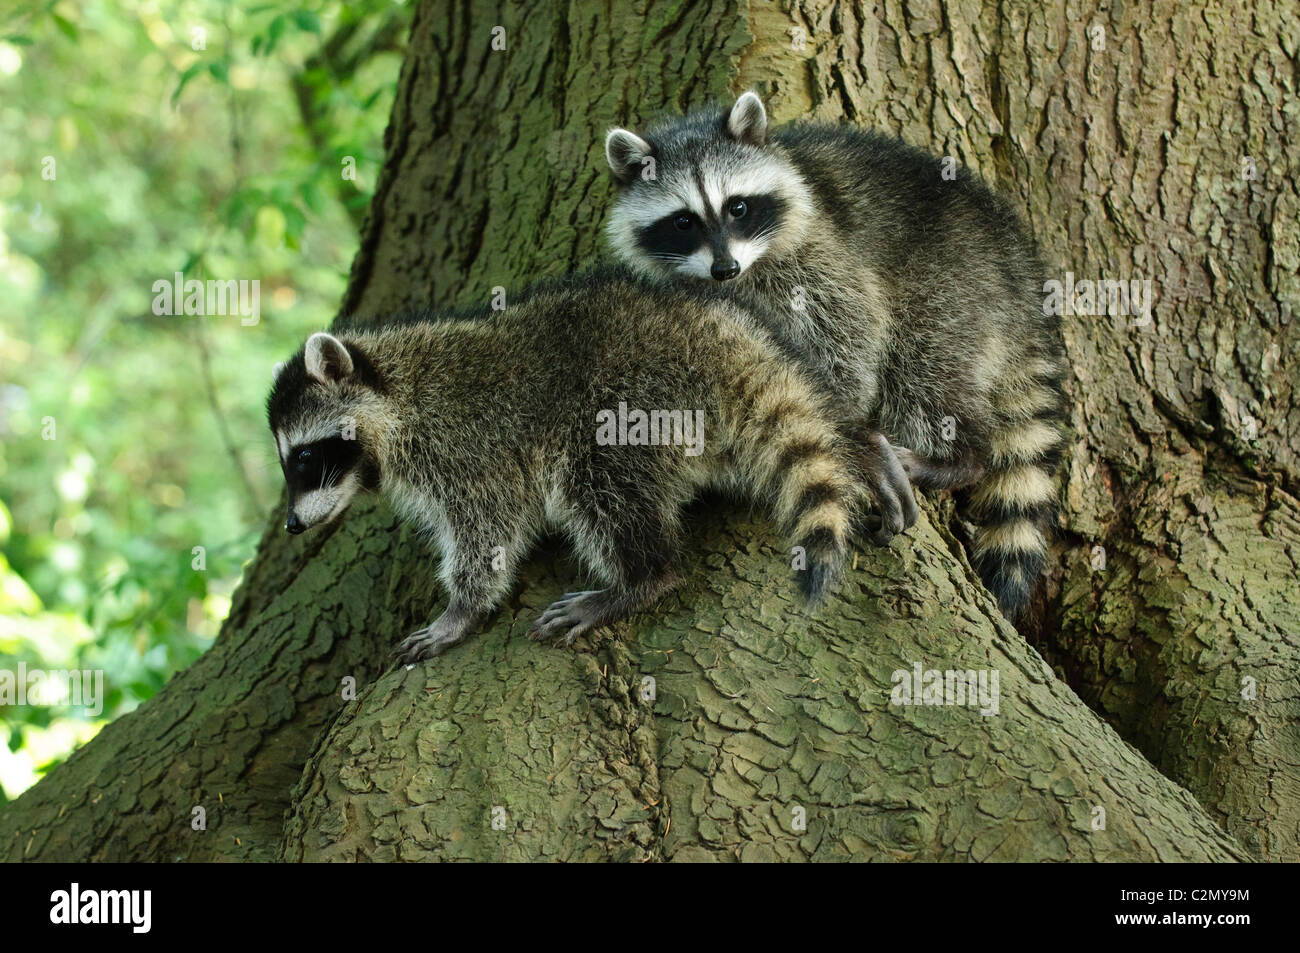 Two young Northern raccoons (Procyon lotor) in a tree, Stanley Park, Vancouver, Canada Stock Photo